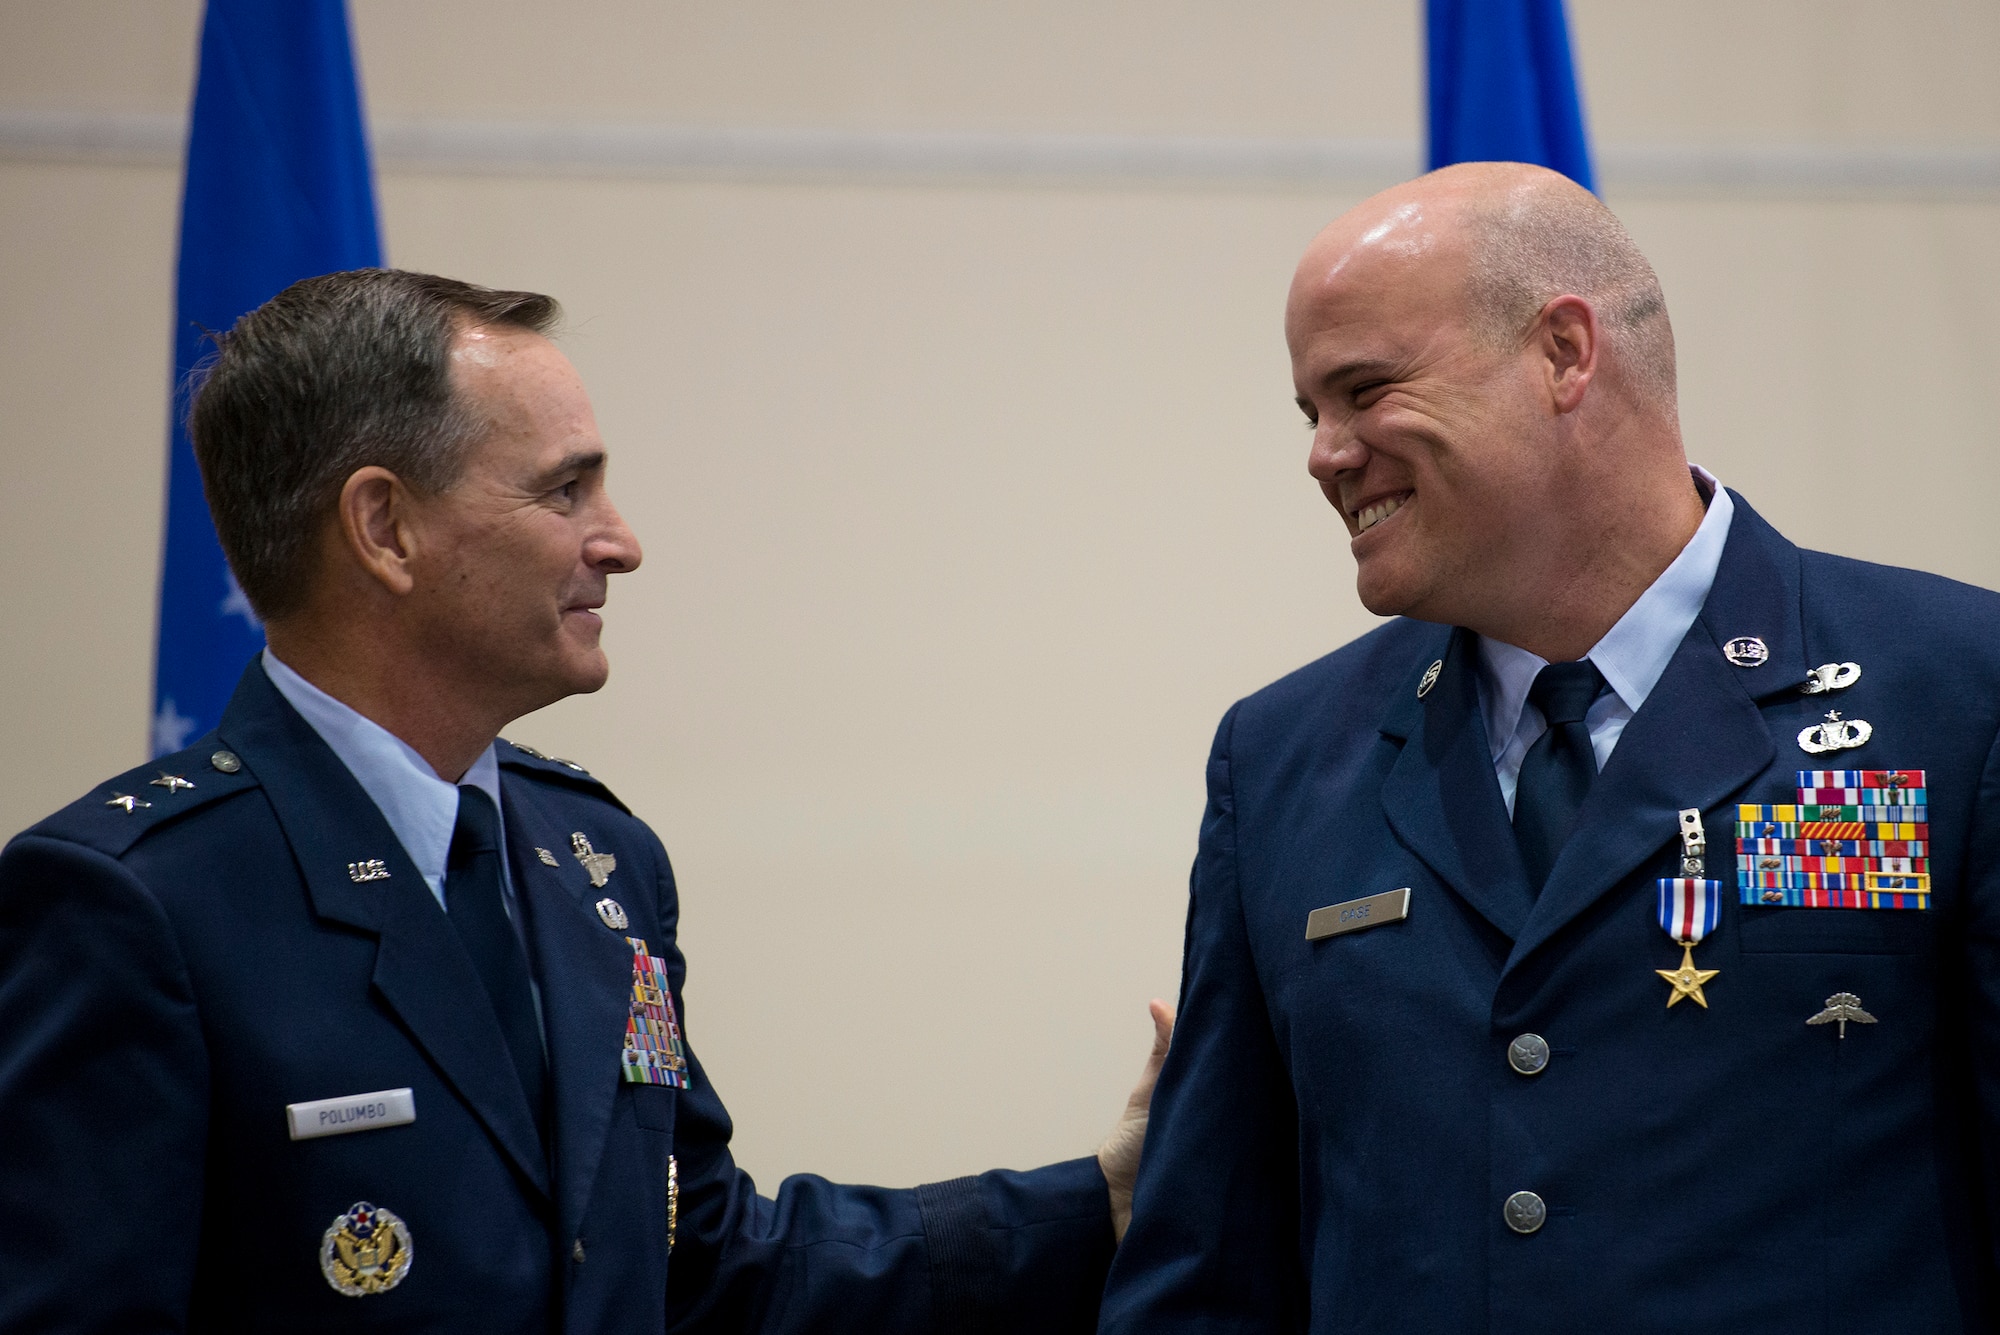 Maj. Gen. Harry Polumbo, Ninth Air Force Commander, presented Master Sgt. Thomas Case, Tactical Air Control Party Airman, 18th Air Support Operations Group, with his second Silver Star medal, Nov. 13, 2014 at Pope Army Airfield, N.C.  Case received the medal for gallantry in action during a 2009 deployment to Afghanistan. The Silver Star Medal is the U.S. military’s third highest military decoration for valor. It is presented for gallantry in action against an enemy of the U.S. (U.S. Air Force photo by Airman 1st Class Ryan Callaghan)